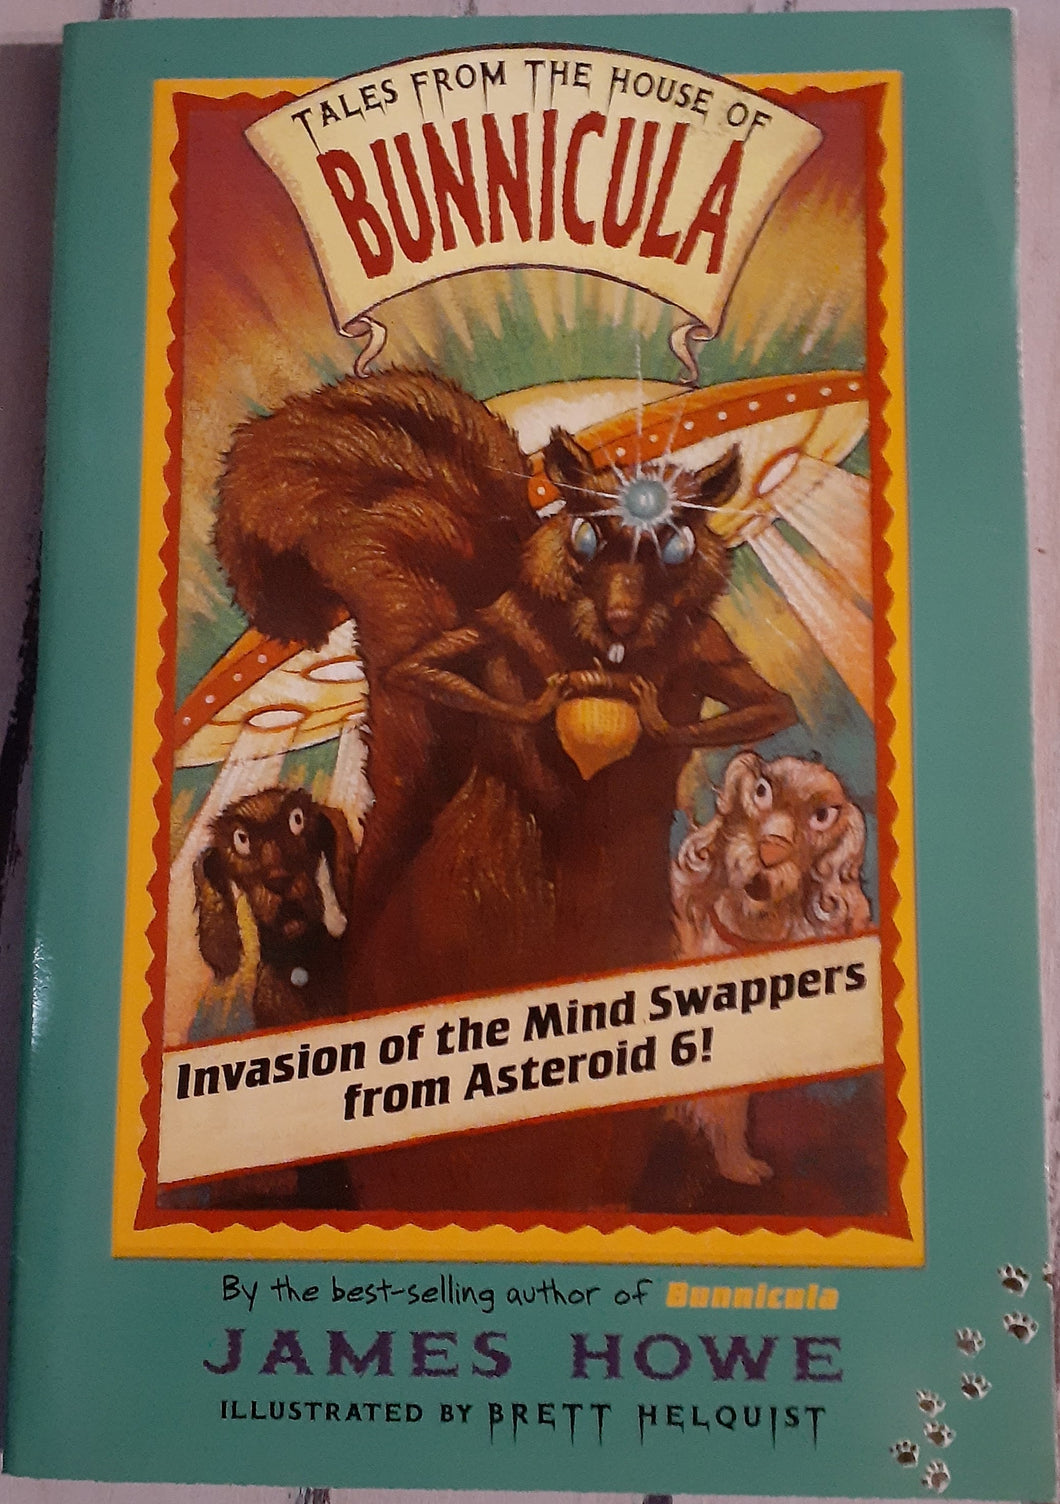 Tales From the House of Bunnicula - Invasion of the Mind Swappers from Asteroid 6!